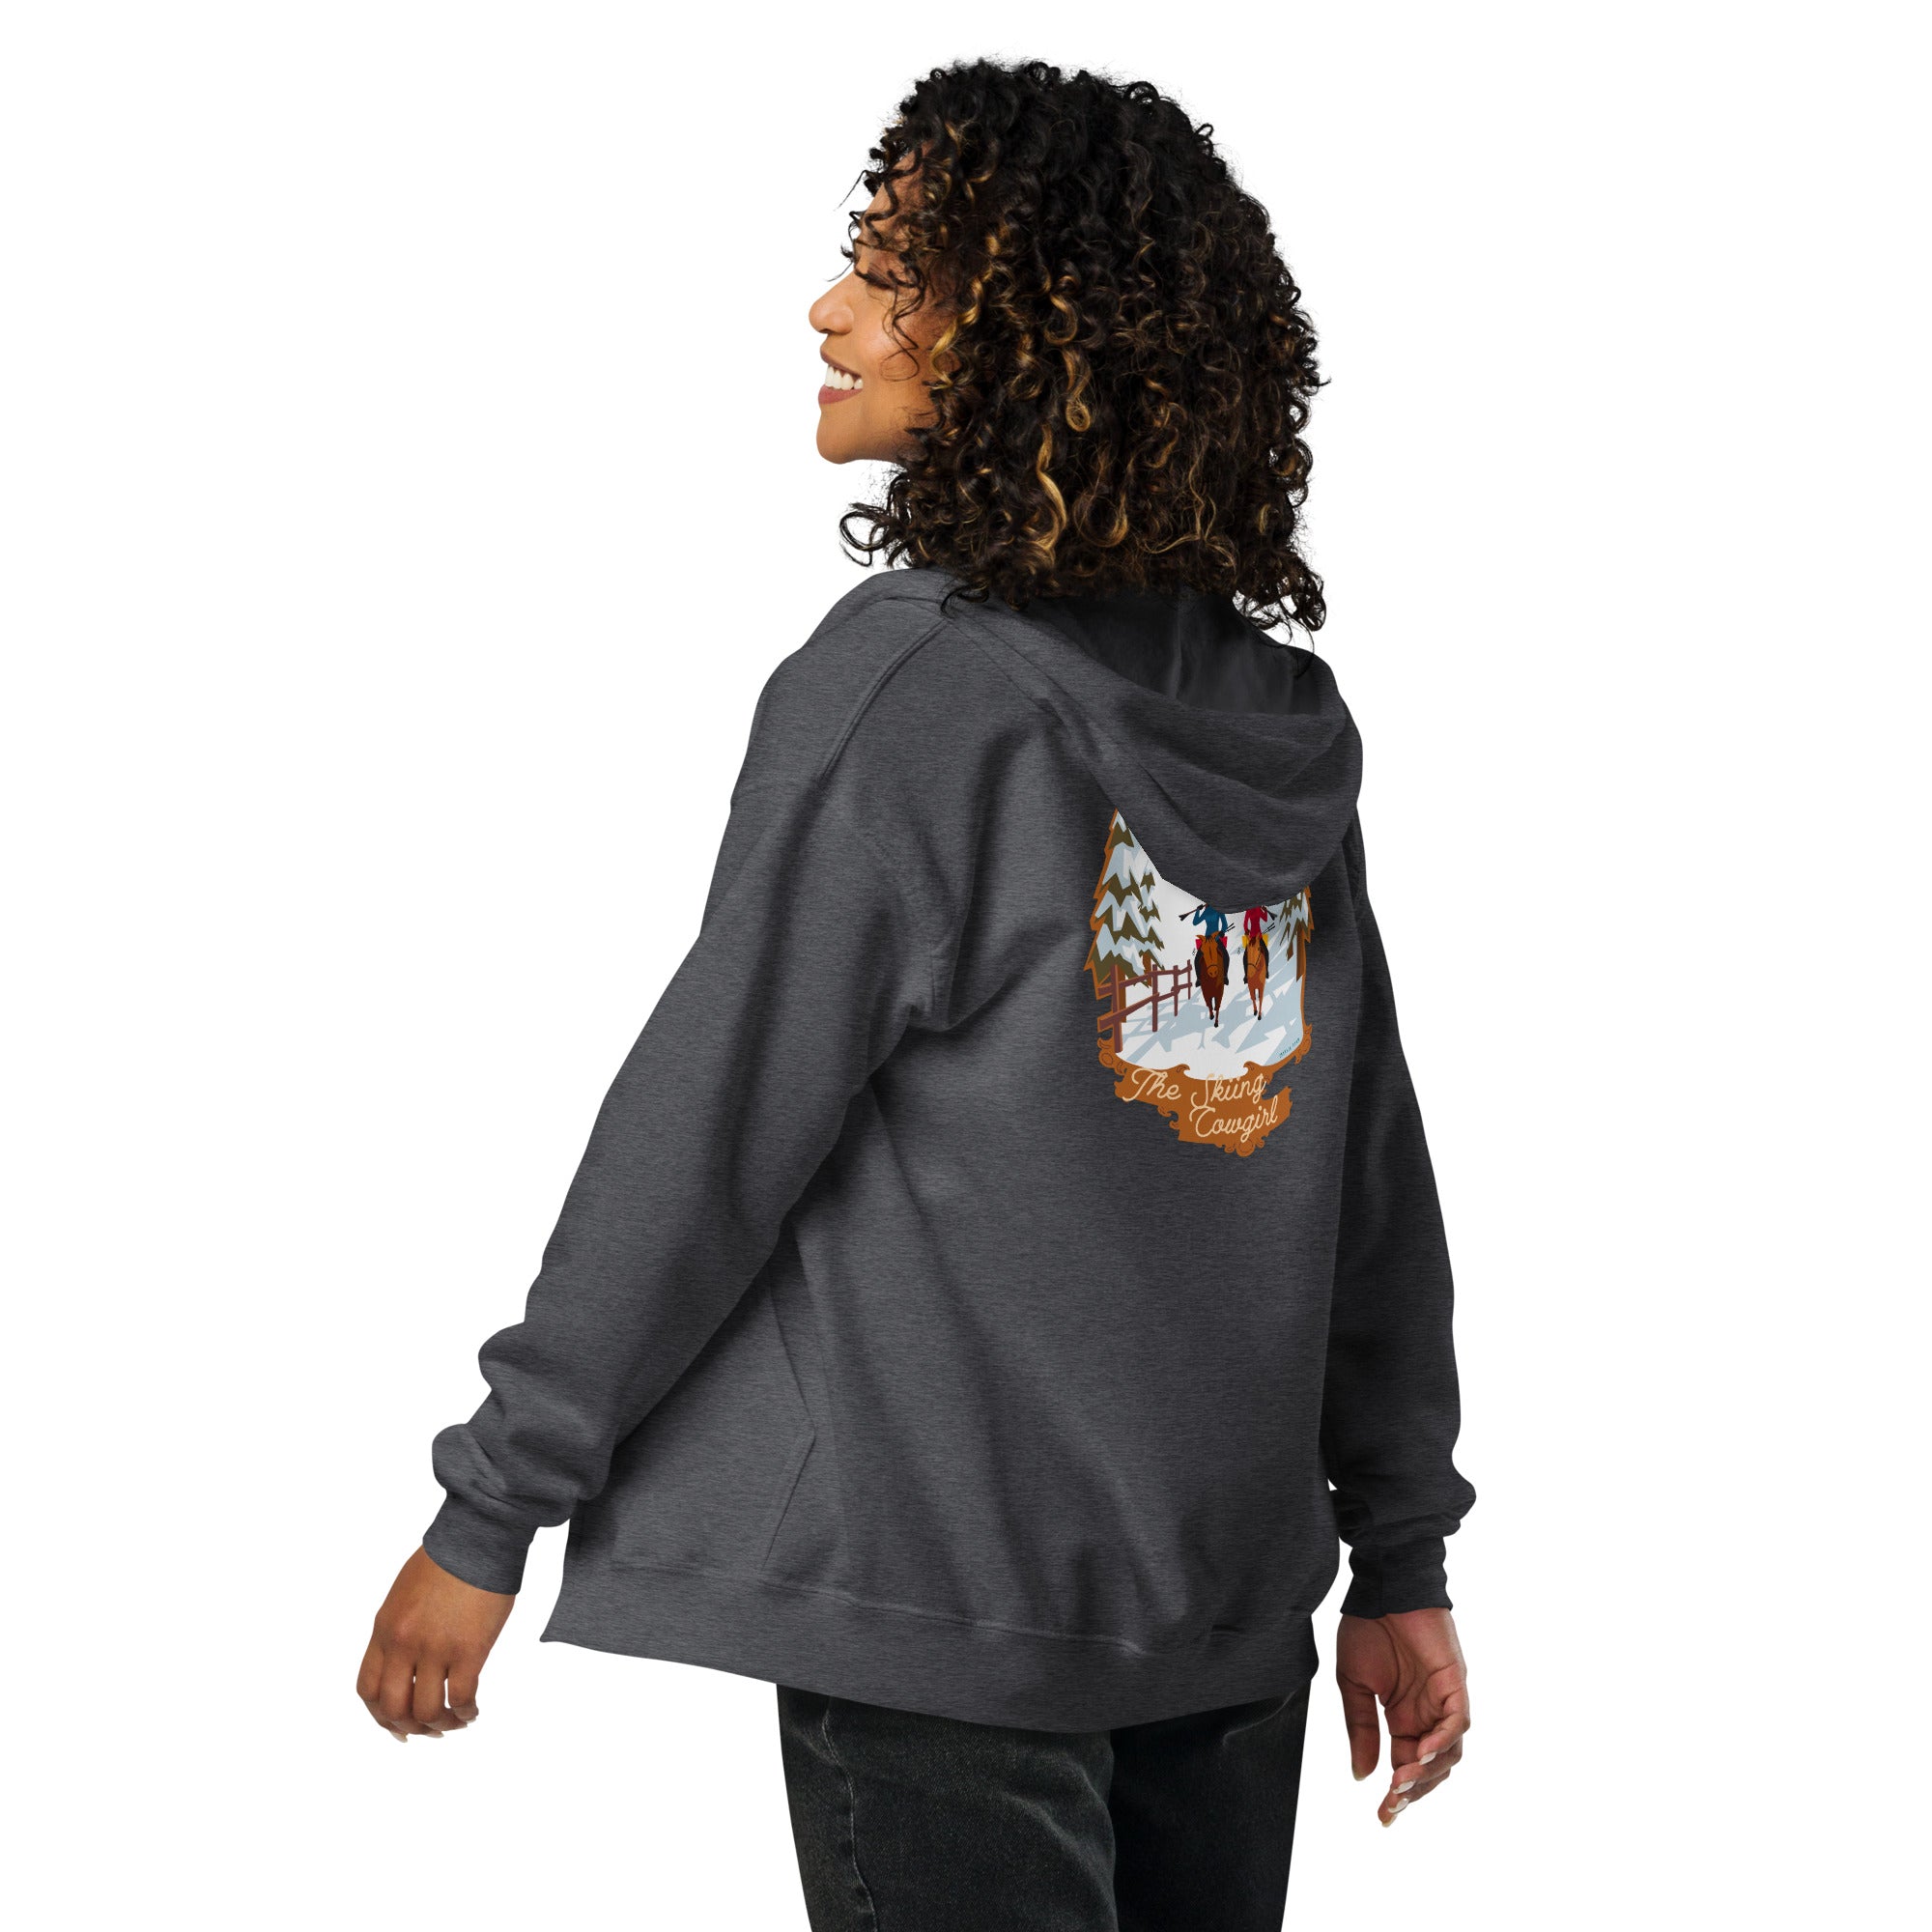 Unisex heavy blend zip hoodie The Skiing Cowgirl (front & back)